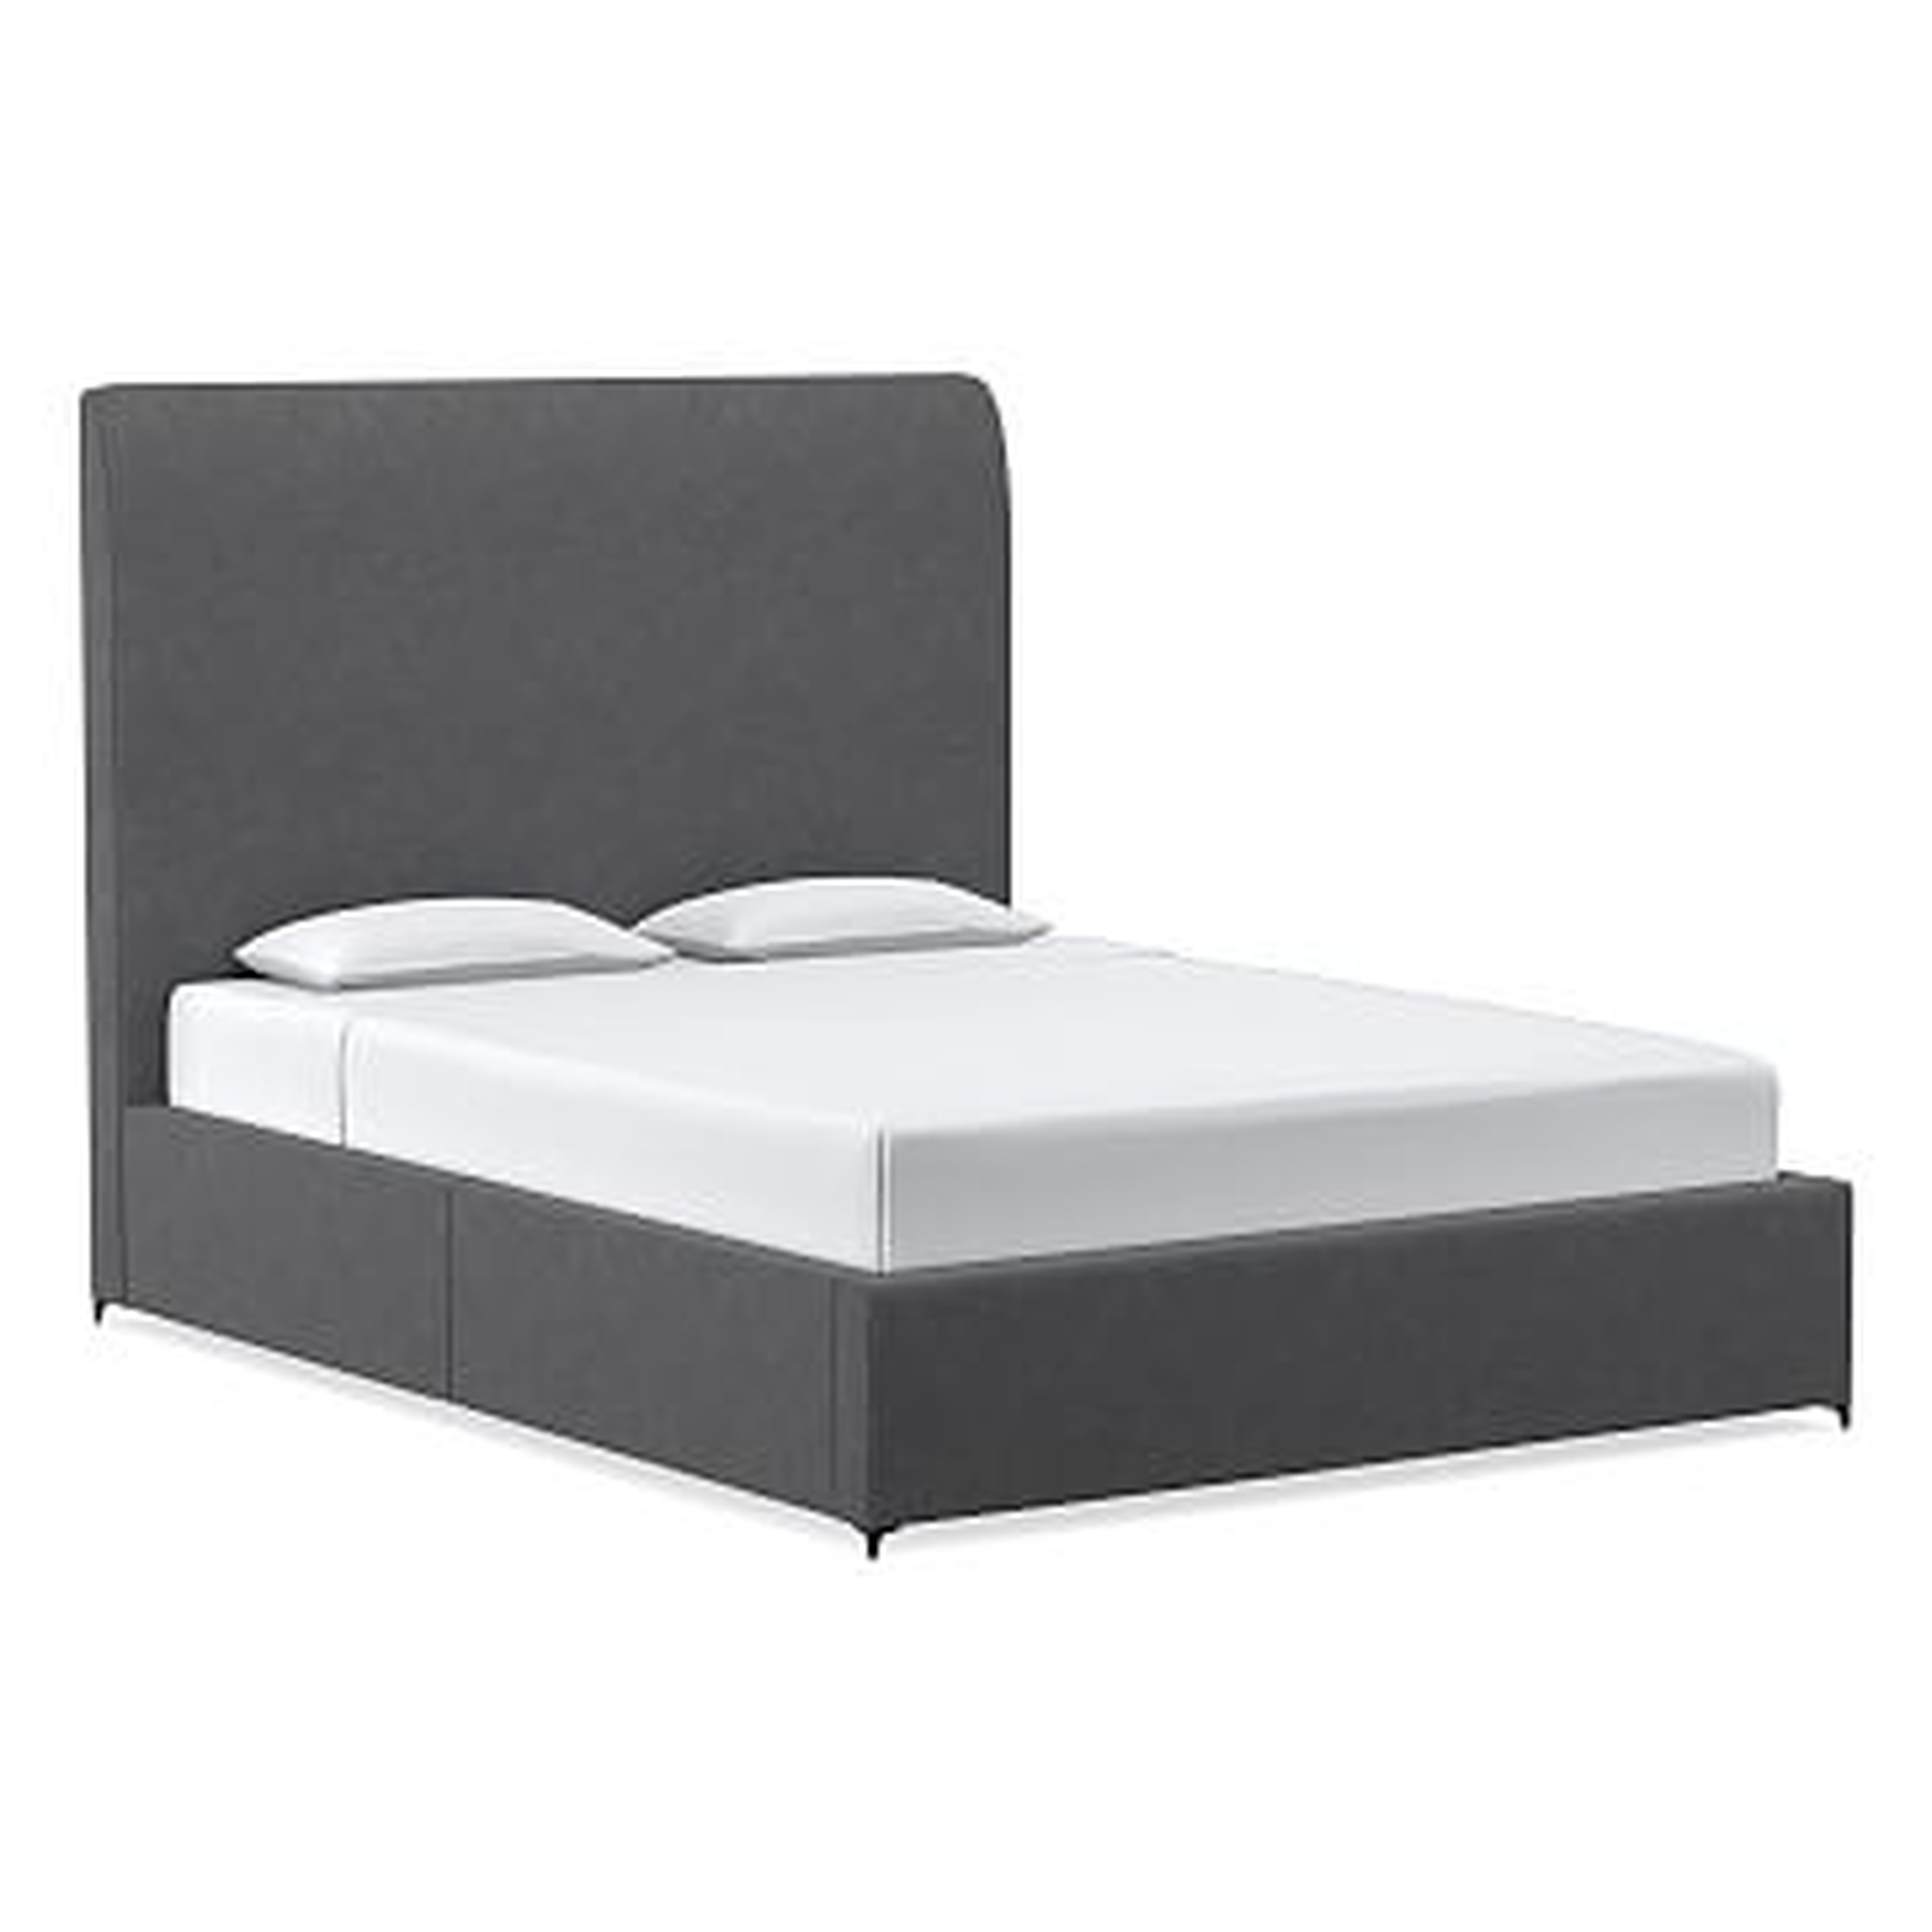 Andes Tall No Tufting, Low Profile Bed, King, DVelvet, Pewter, Dark Pewter - West Elm